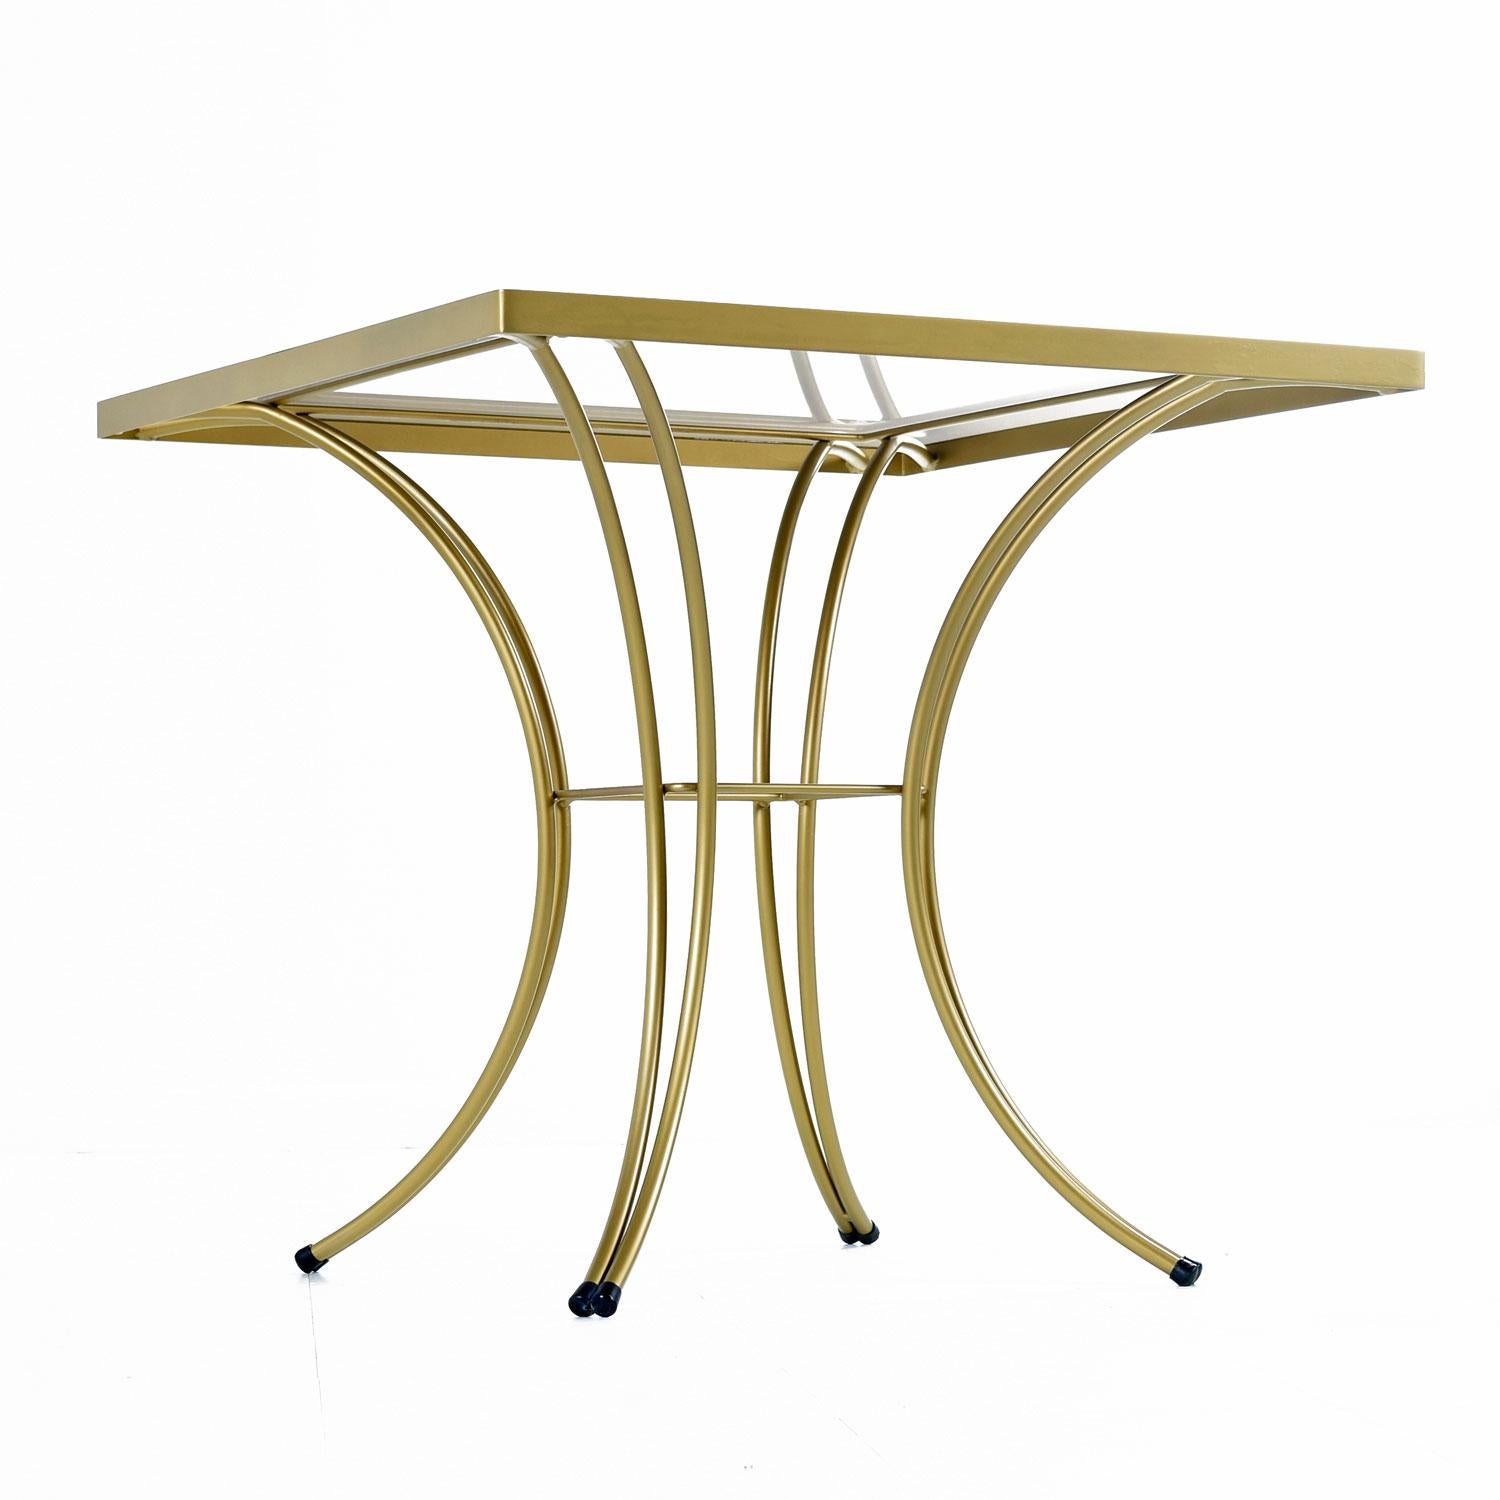 Salterini Style Art Deco / Modern Gold Painted Gilt Metal Glass Top Dinette Set For Sale 2